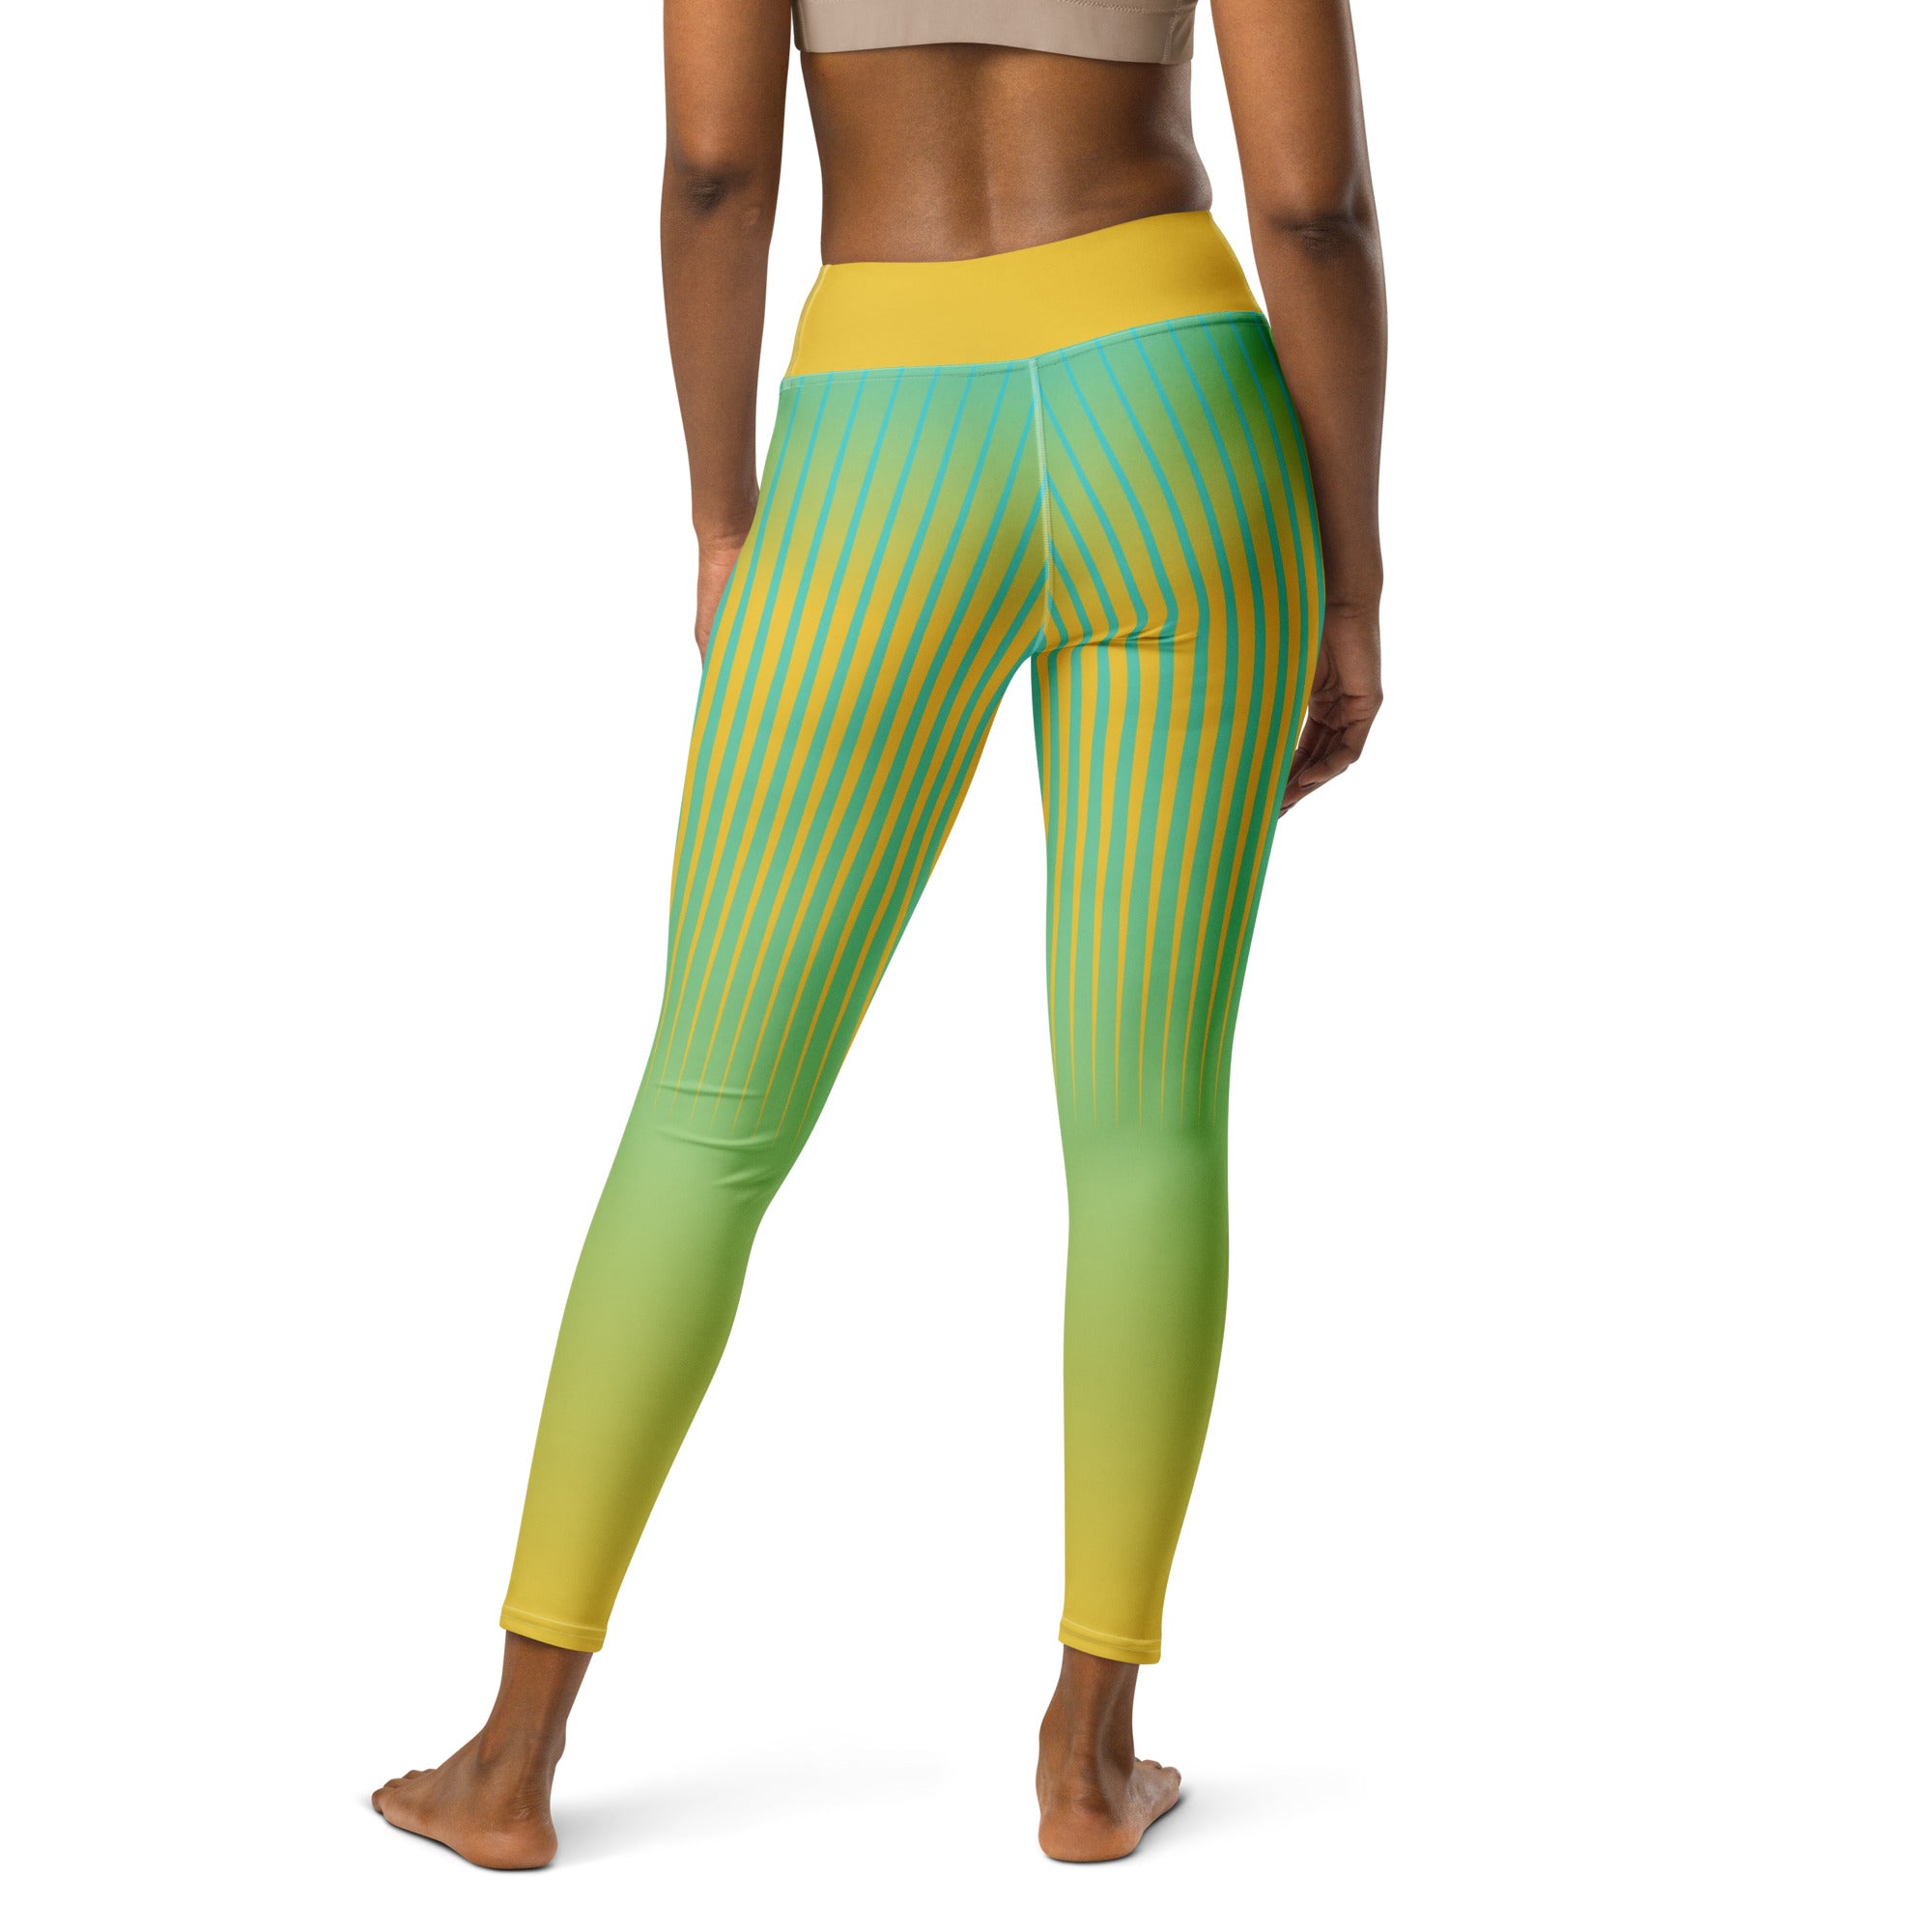 Crystal clear gradient leggings perfect for yoga and fitness enthusiasts.